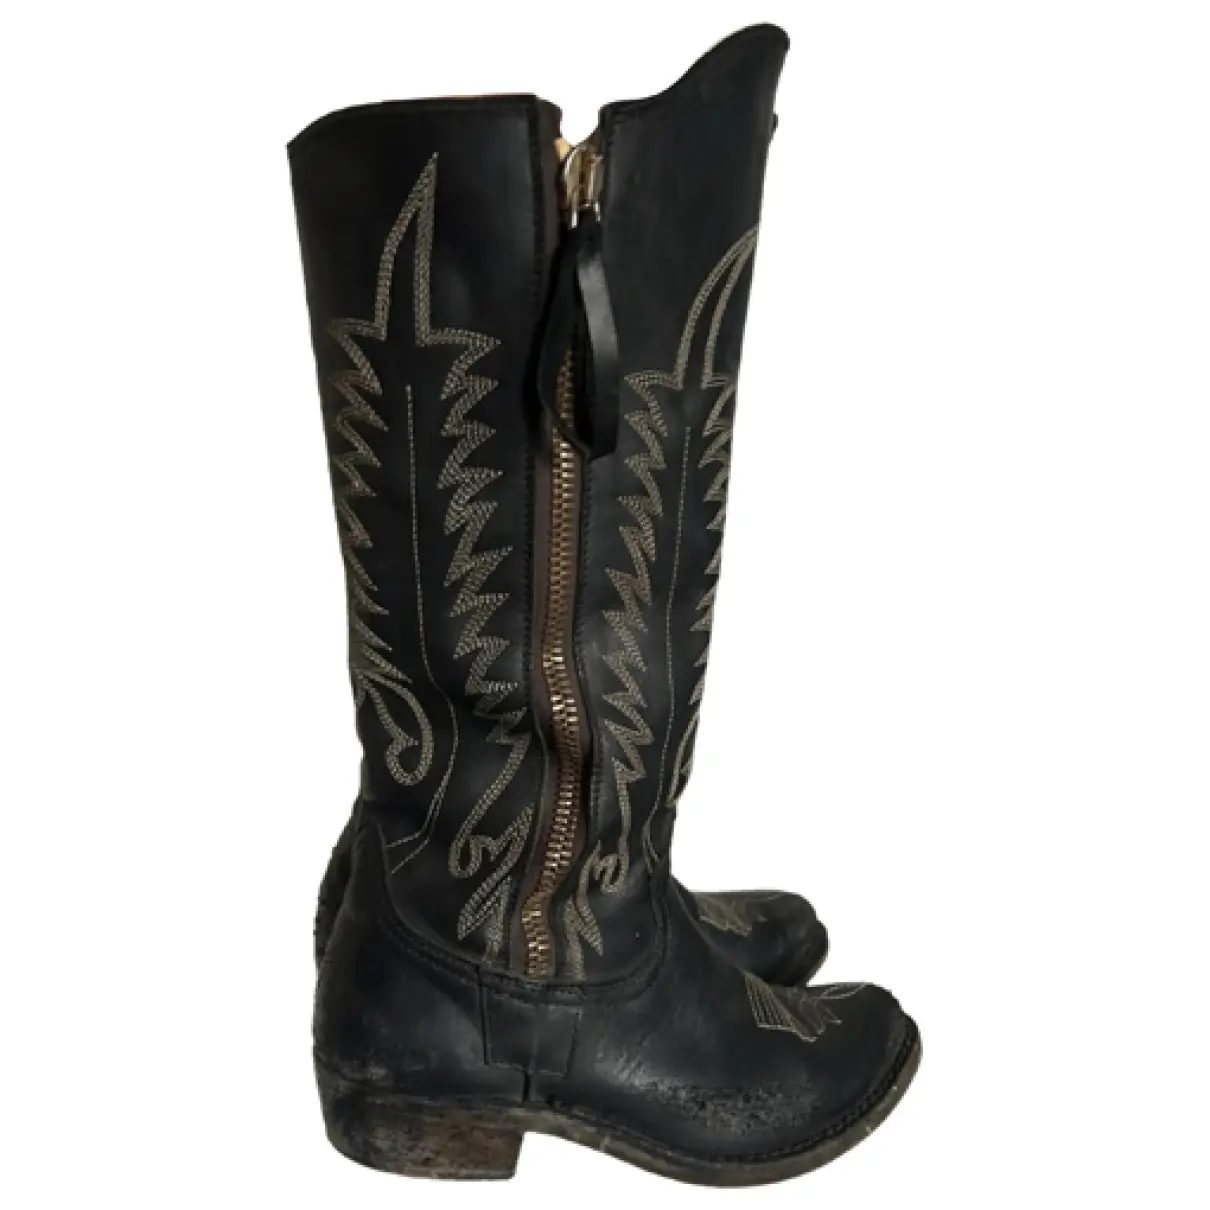 Wish Star leather cowboy boots